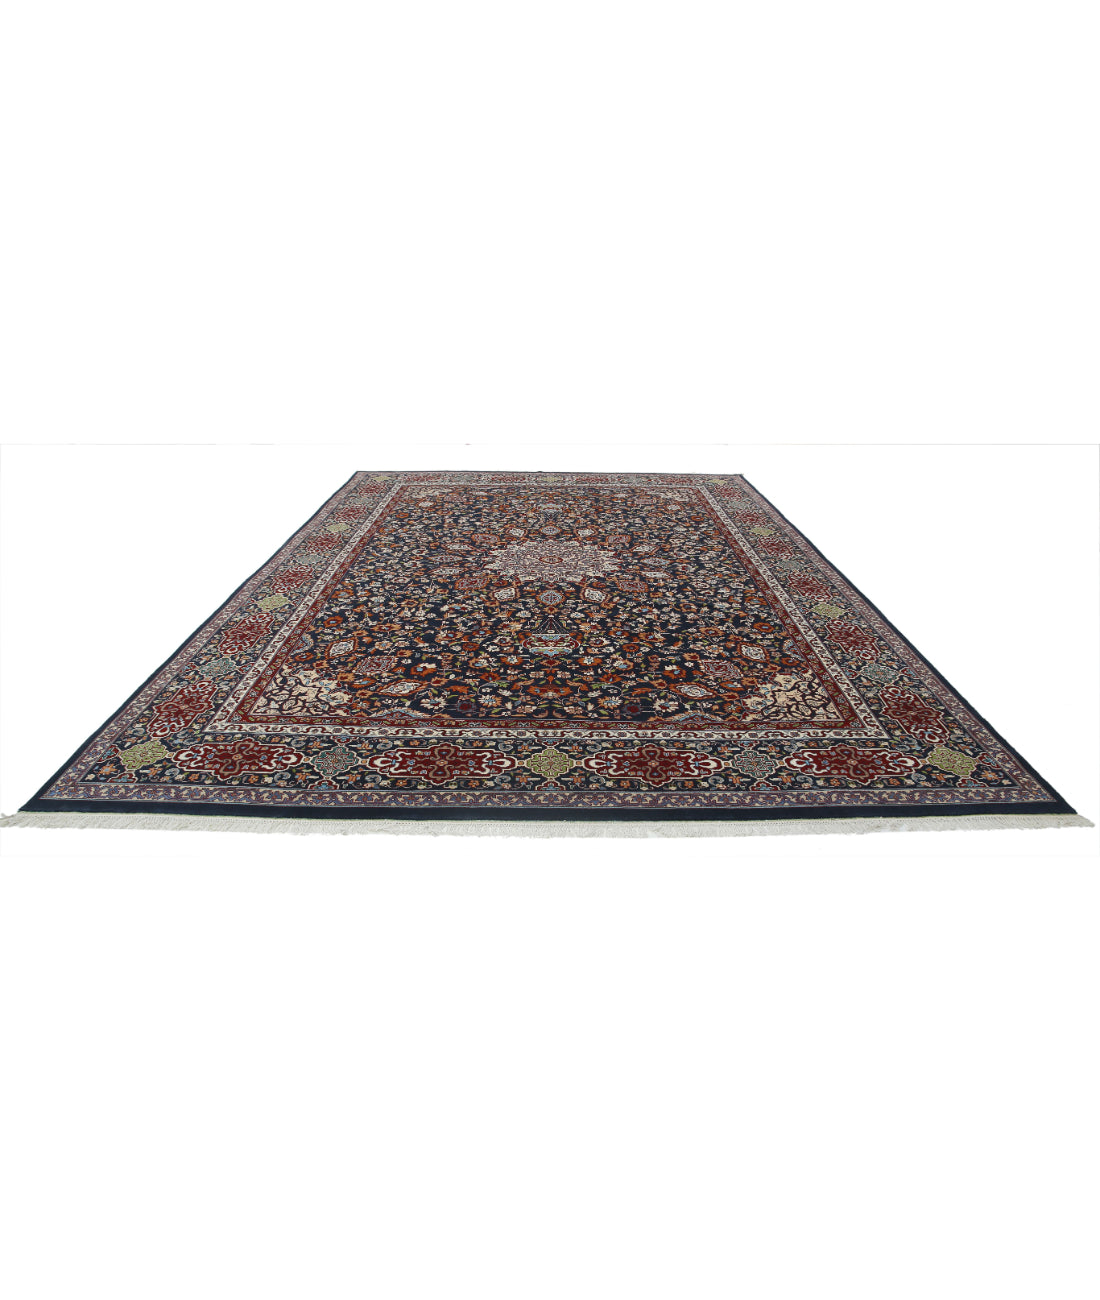 Hand Knotted Persian Tabriz Wool Rug - 9'11'' x 13'9'' 9'11'' x 13'9'' (298 X 413) / Blue / Red